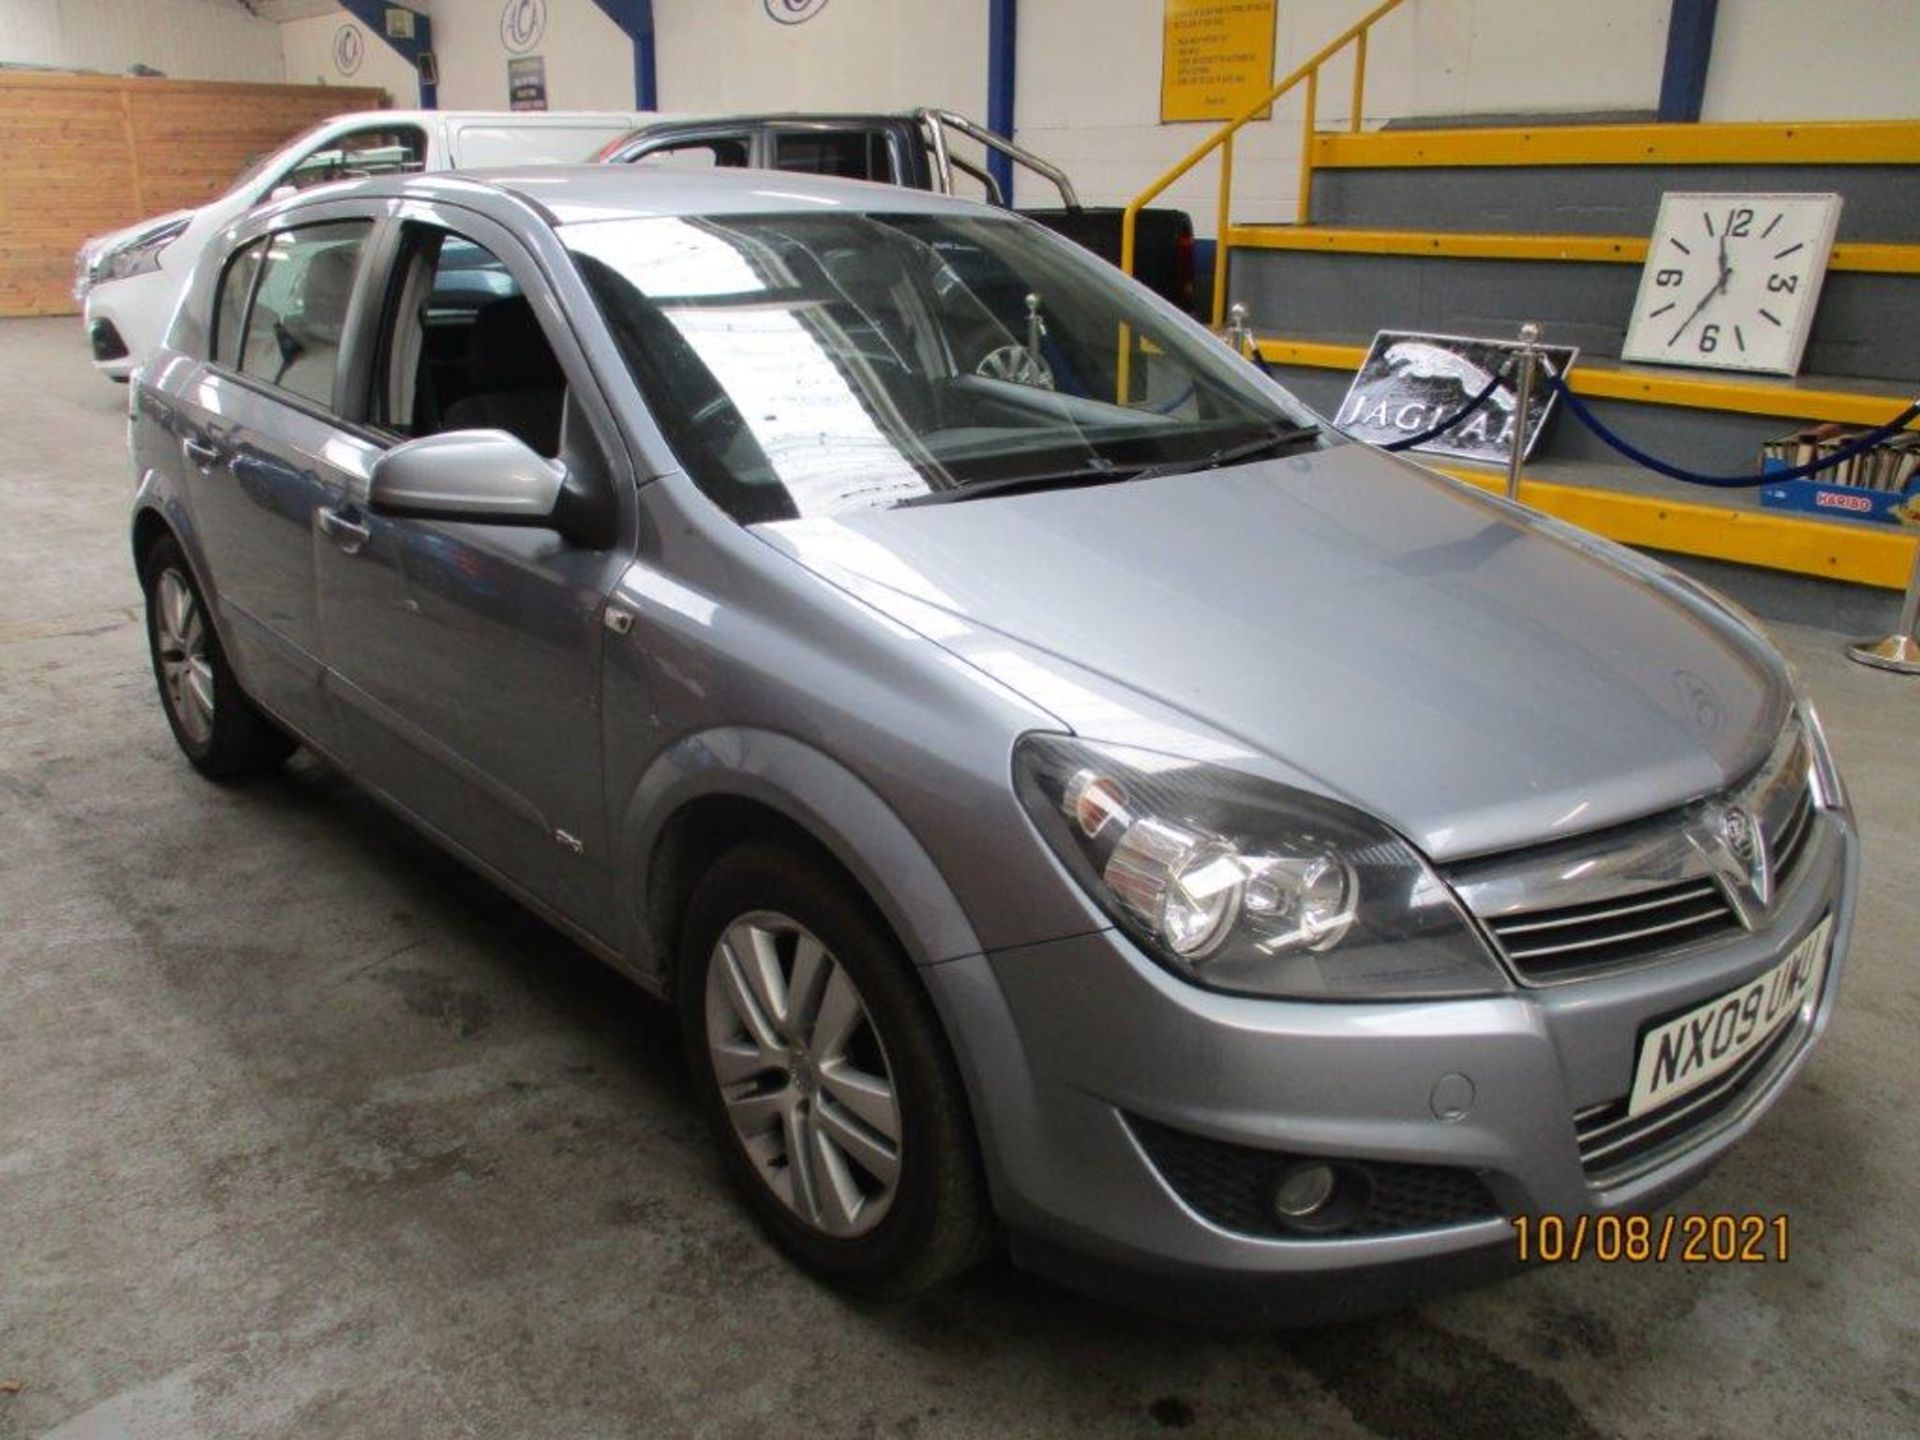 09 09 Vauxhall Astra SXI Twinport - Image 4 of 9